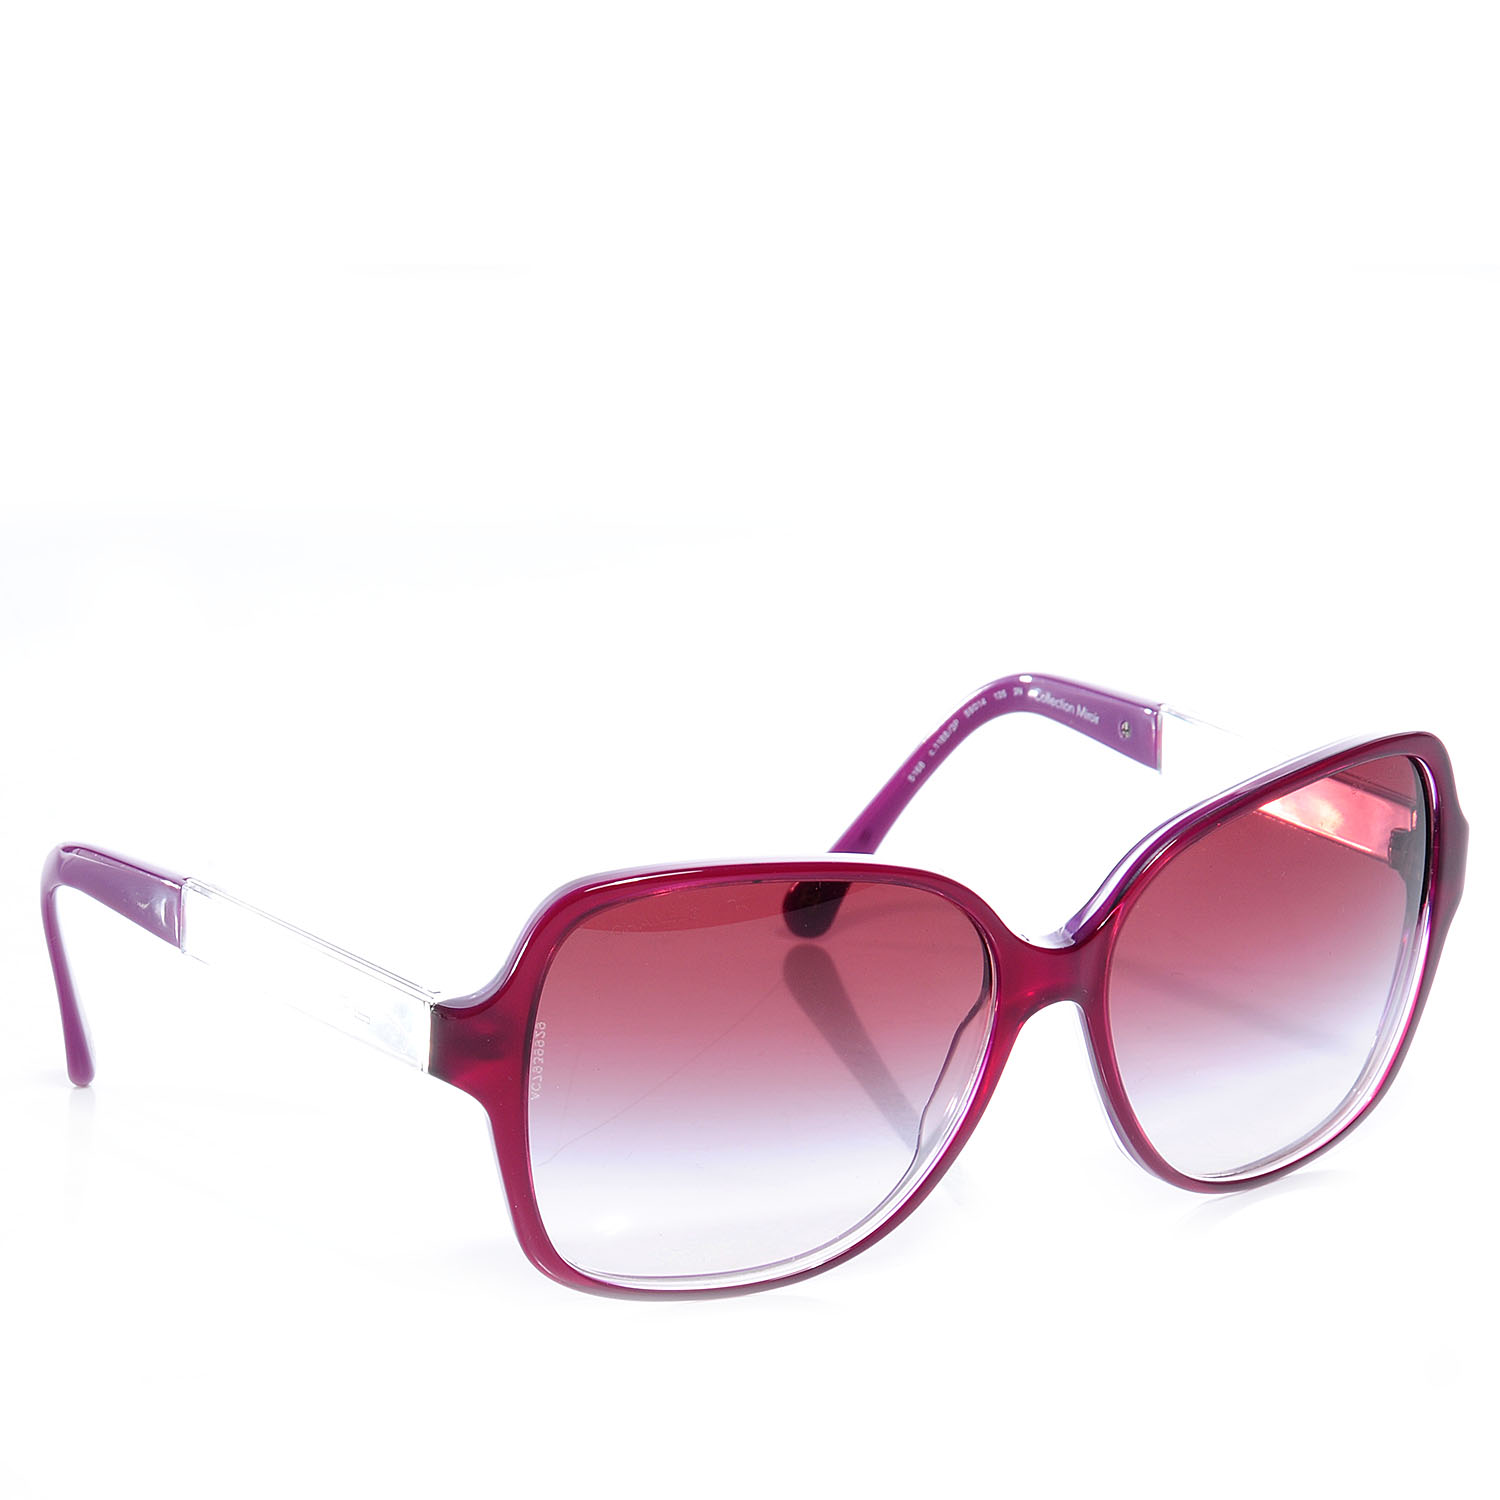 CHANEL Oversized Square Miroir Collection Sunglasses 5168 Pink 82500